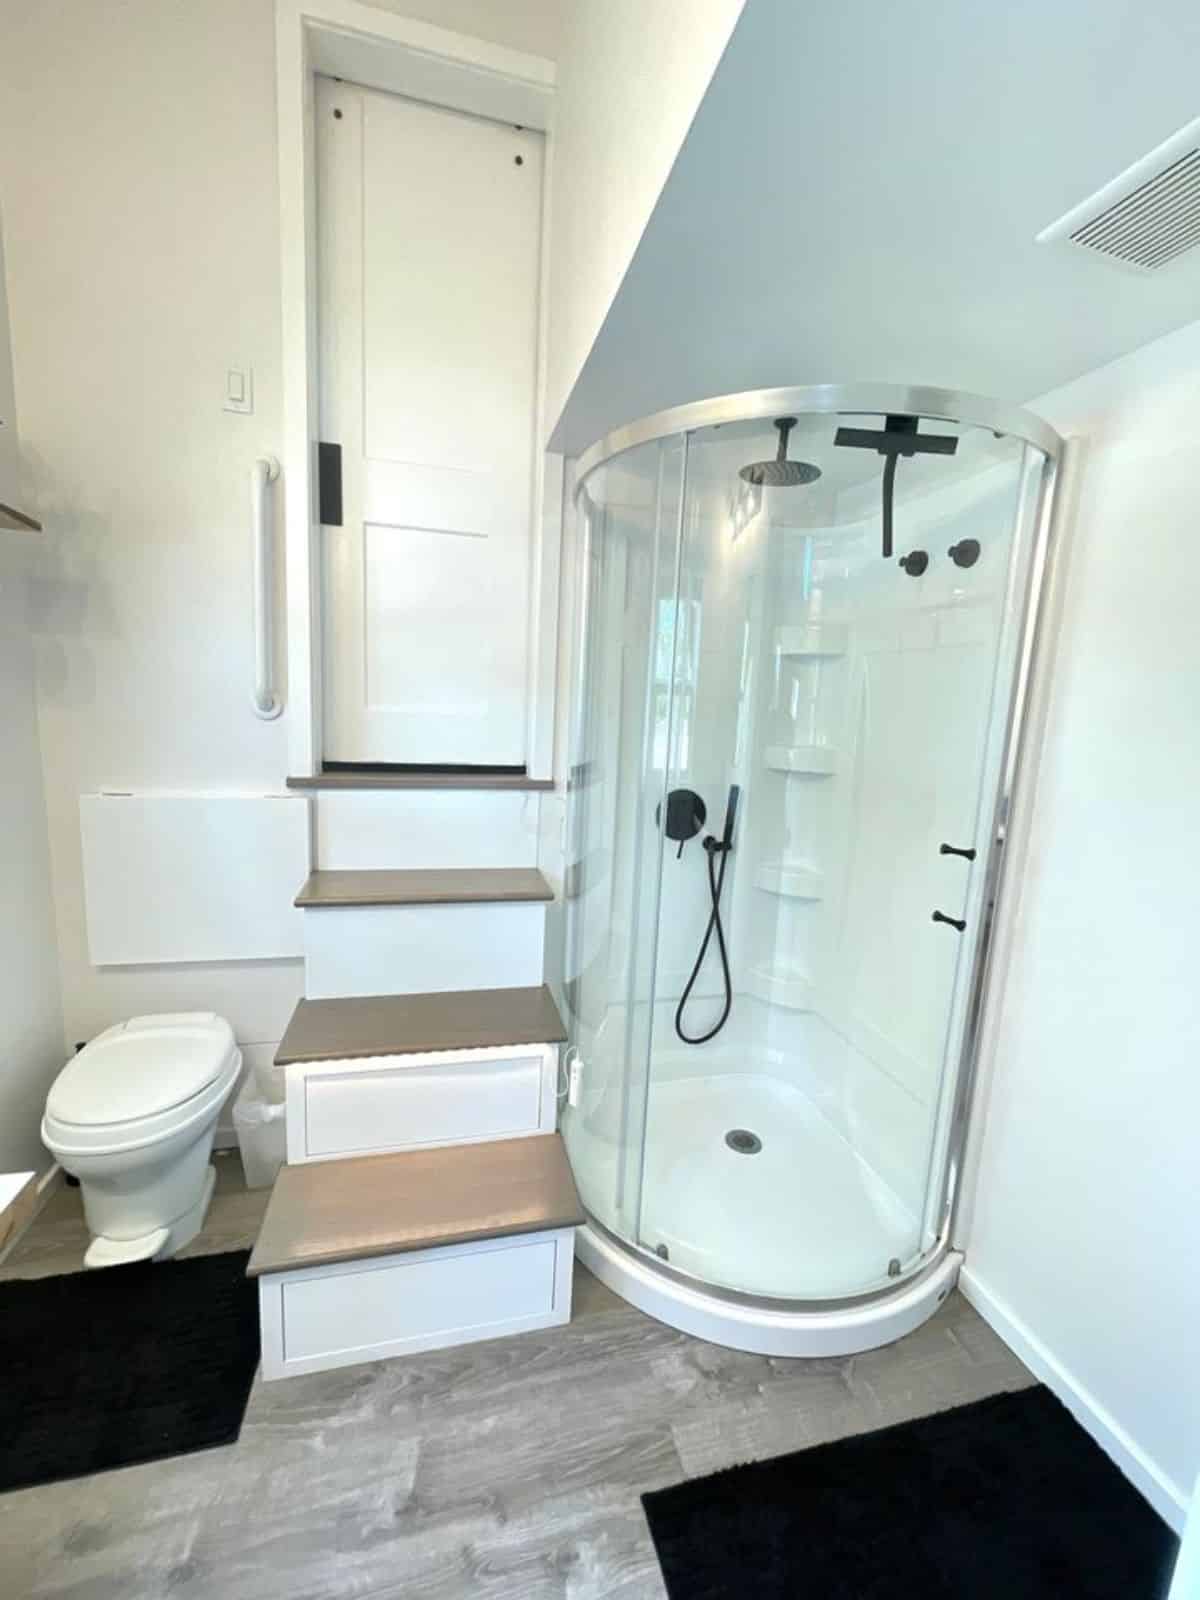 Stunning shower area made of glass plus standard toilet in bathroom